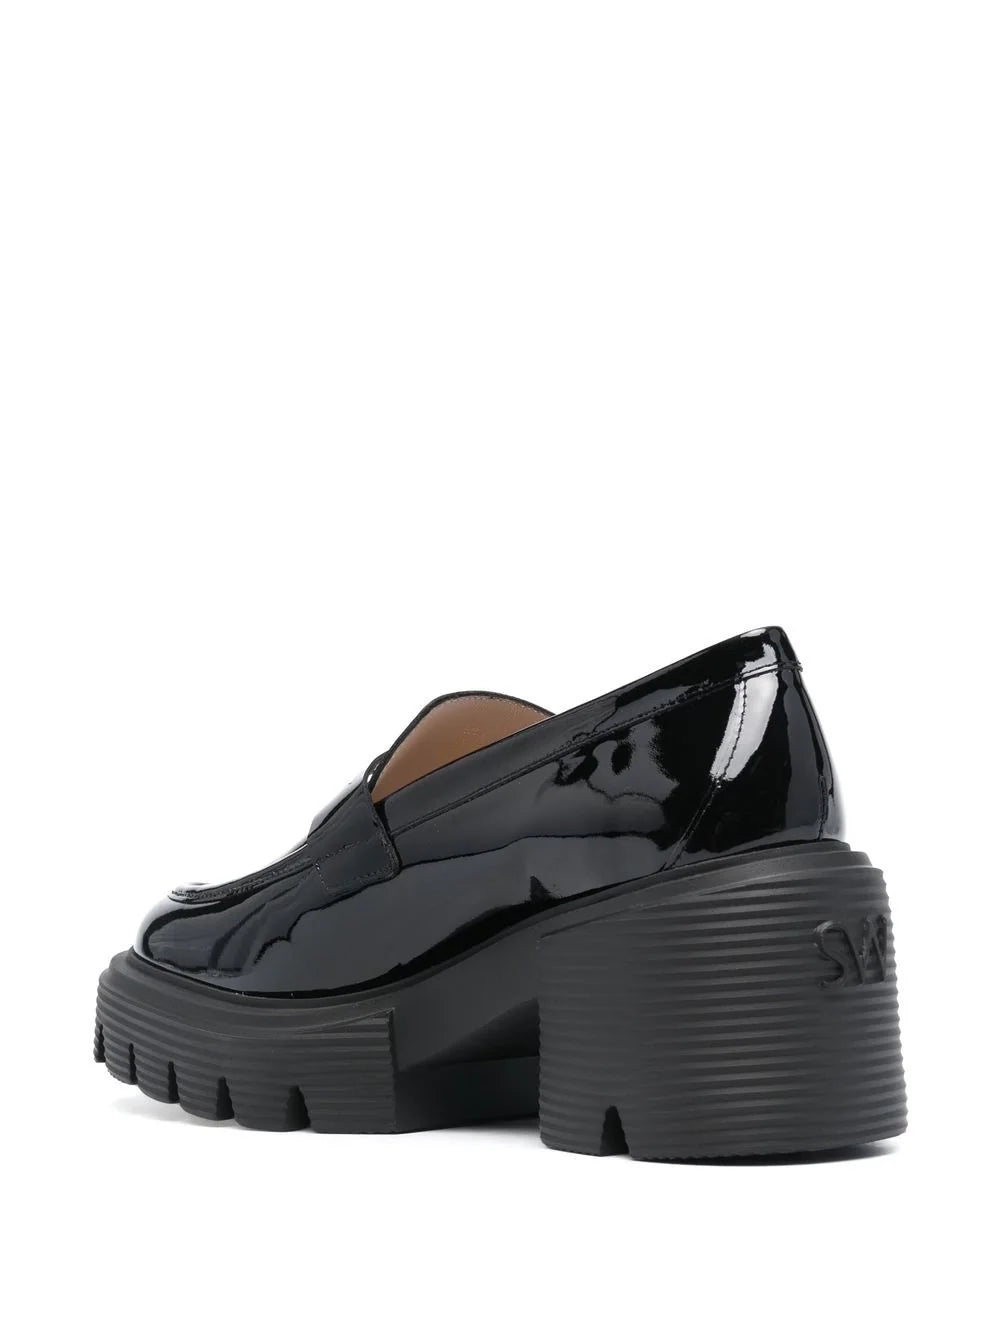 SOHO patent-leather loafers, black